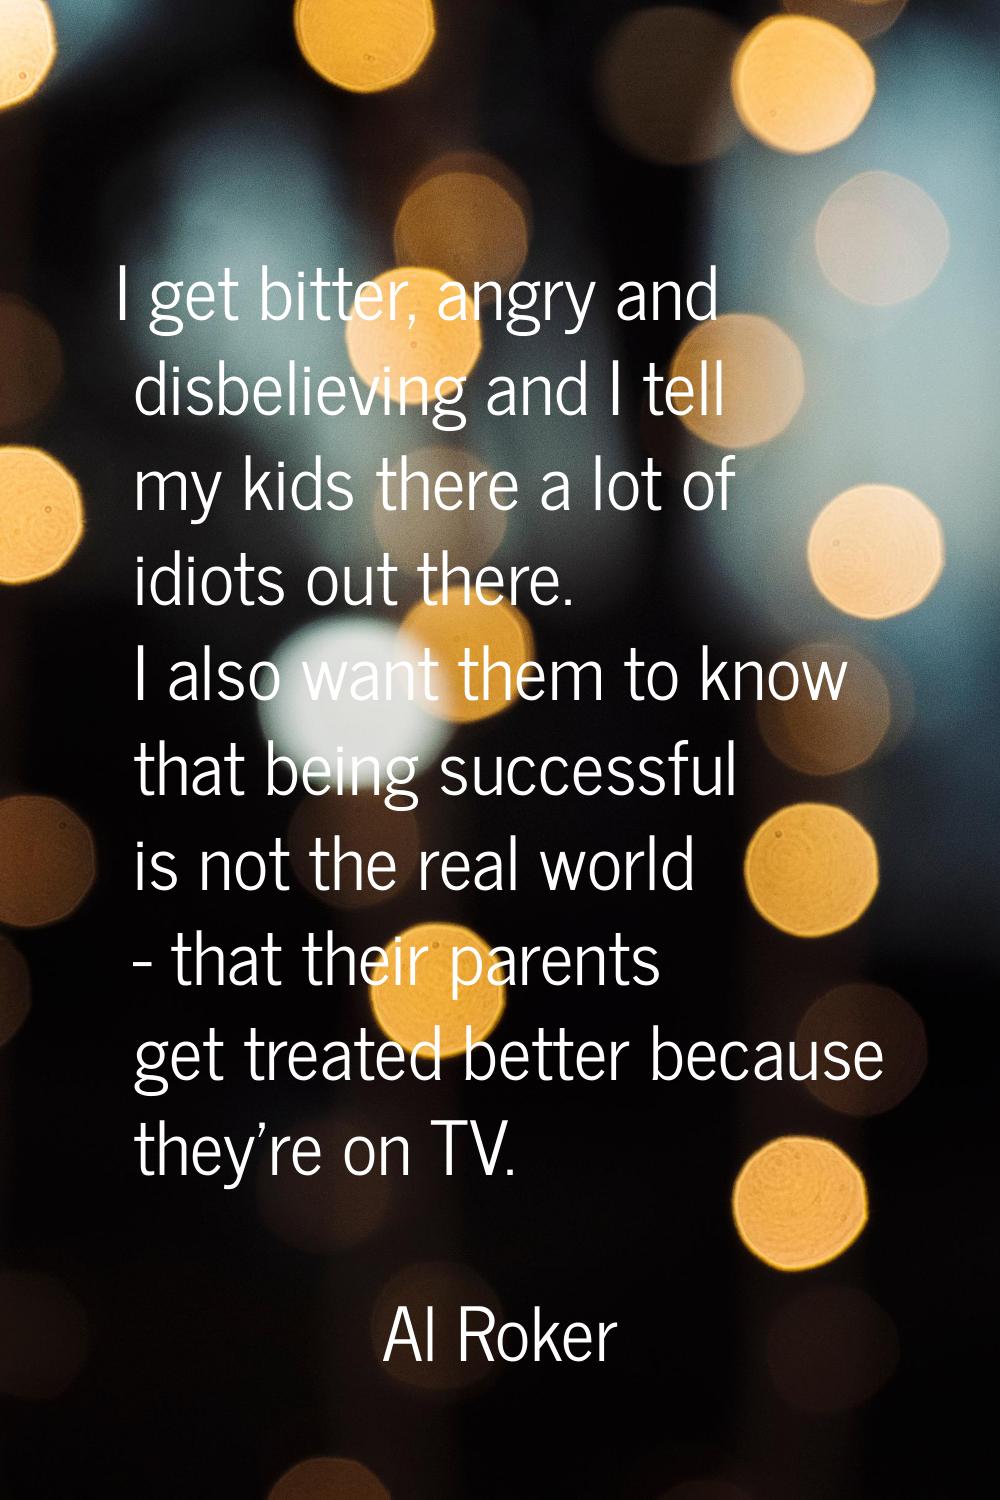 I get bitter, angry and disbelieving and I tell my kids there a lot of idiots out there. I also wan